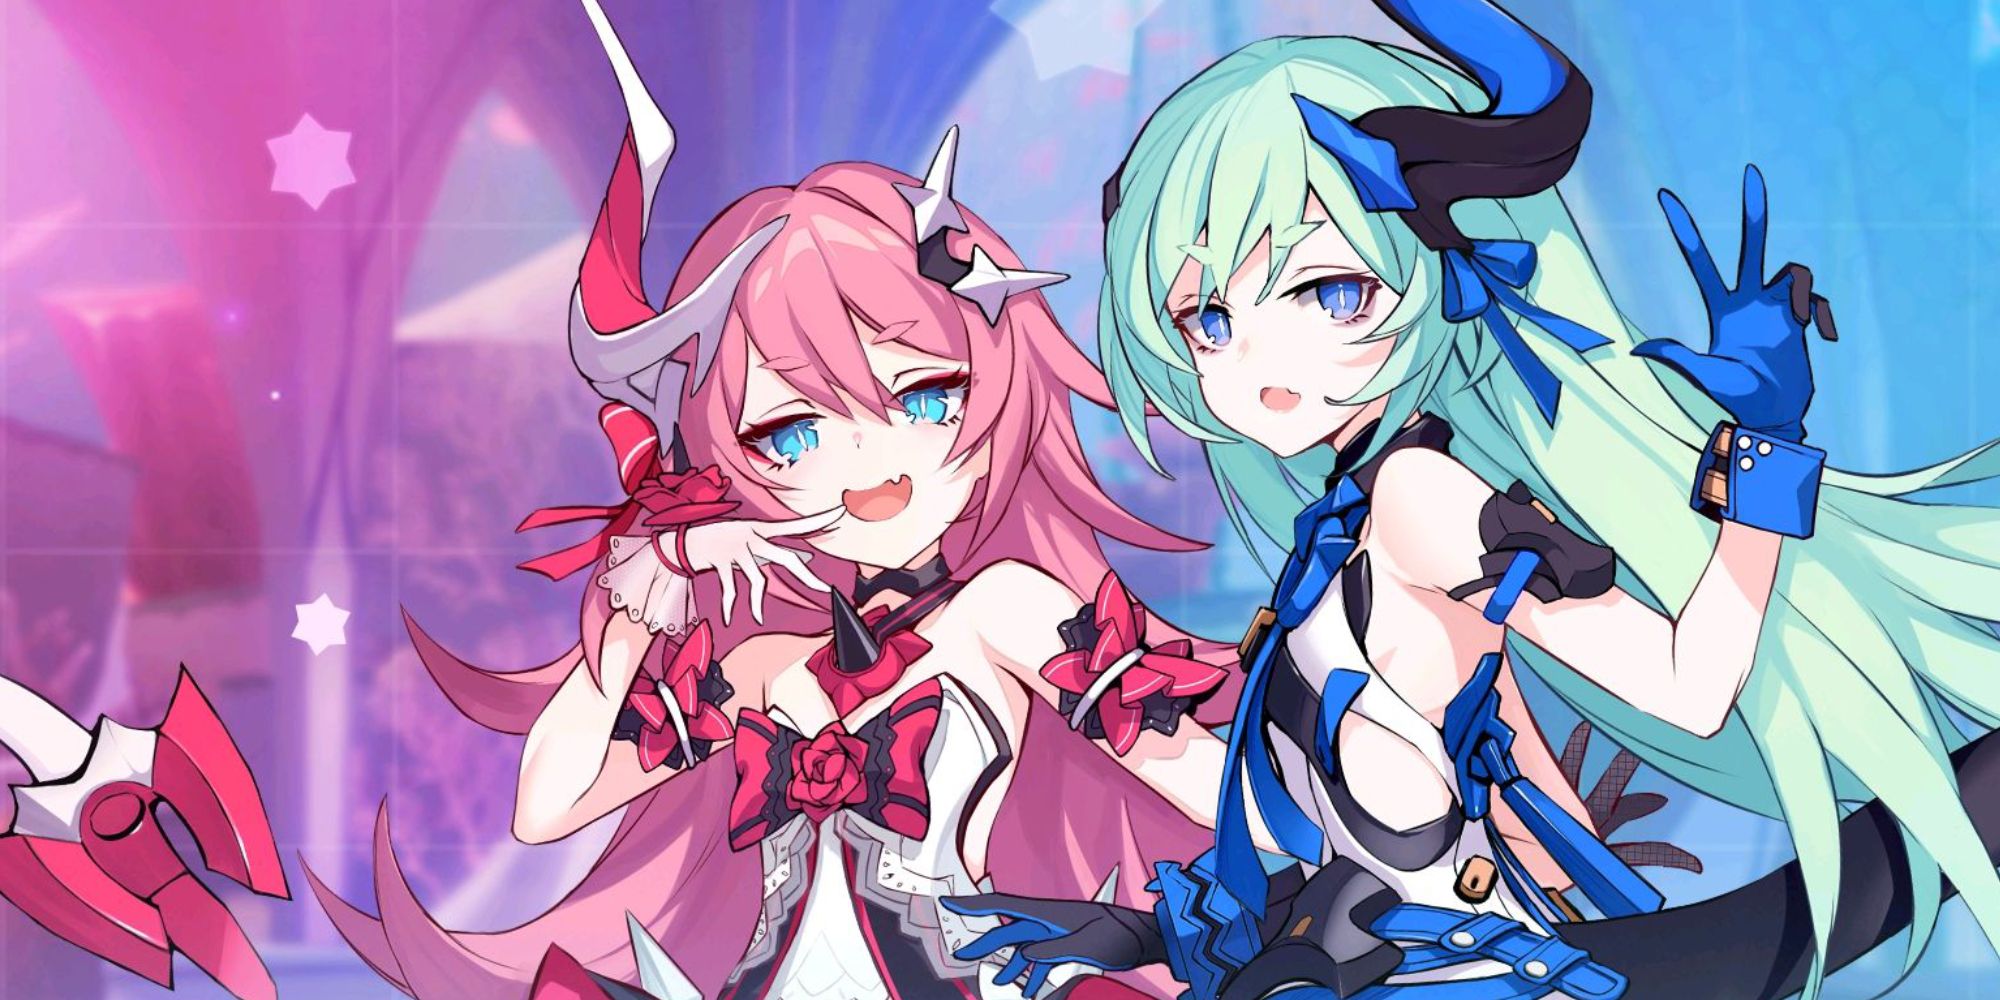 Honkai Impact 3rd Liliy next to her twin